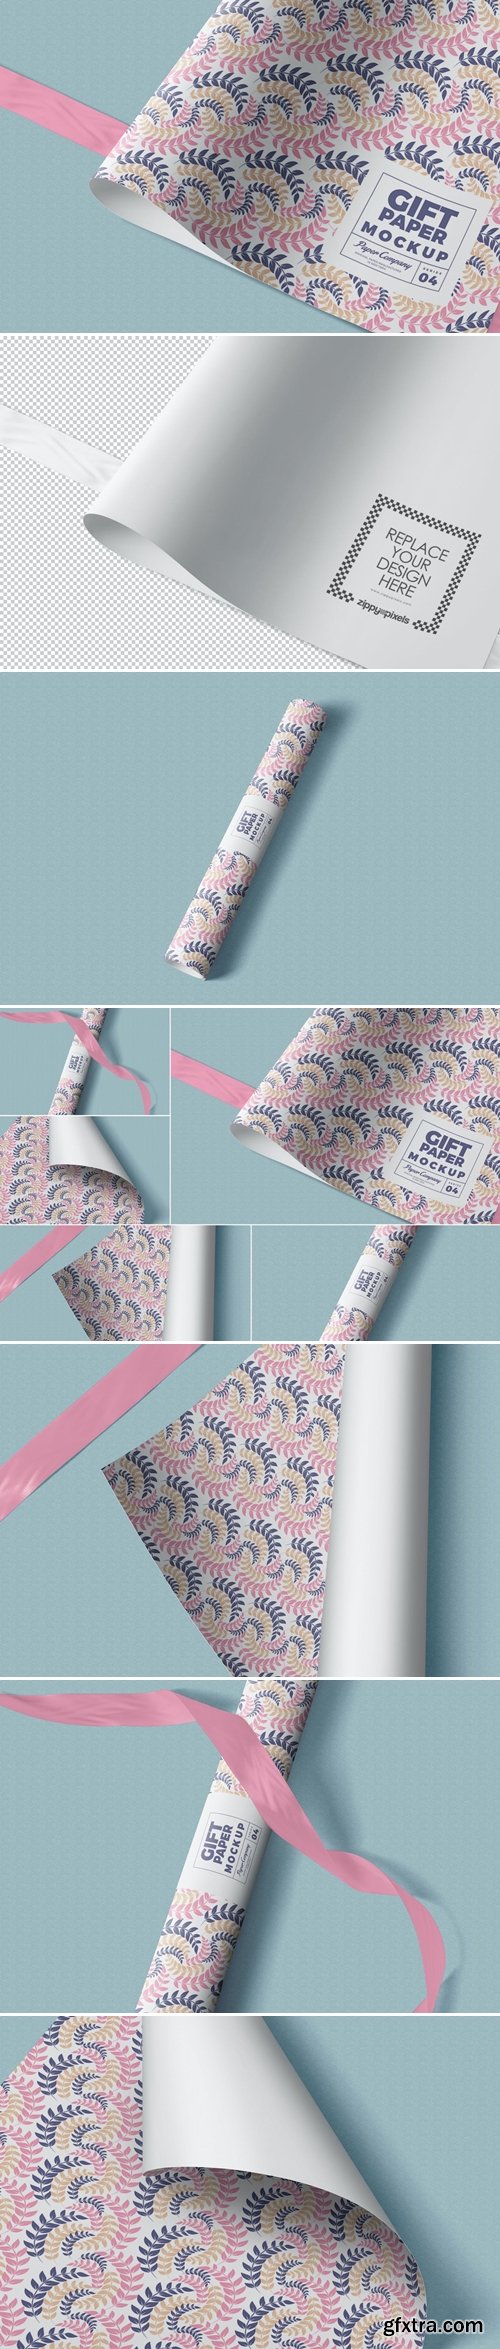 Gift Wrapping Paper Mockups